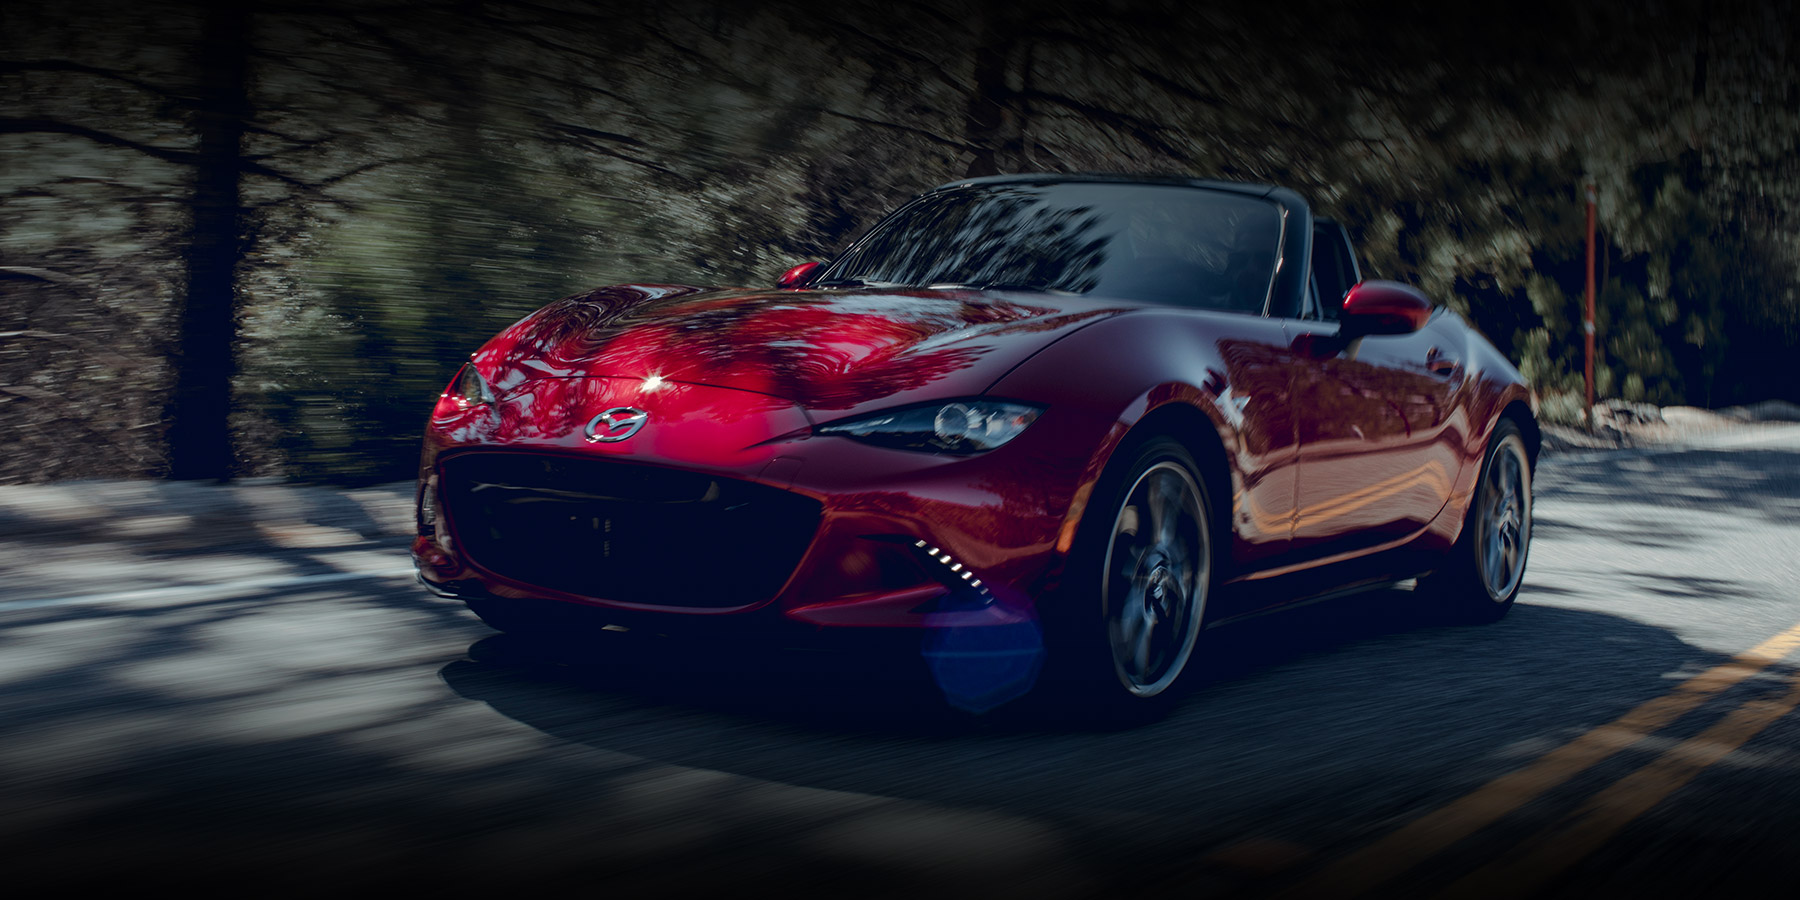 What's New About 2019 MX-5 Miata? Almost Everything - Velocity Mazda Blog